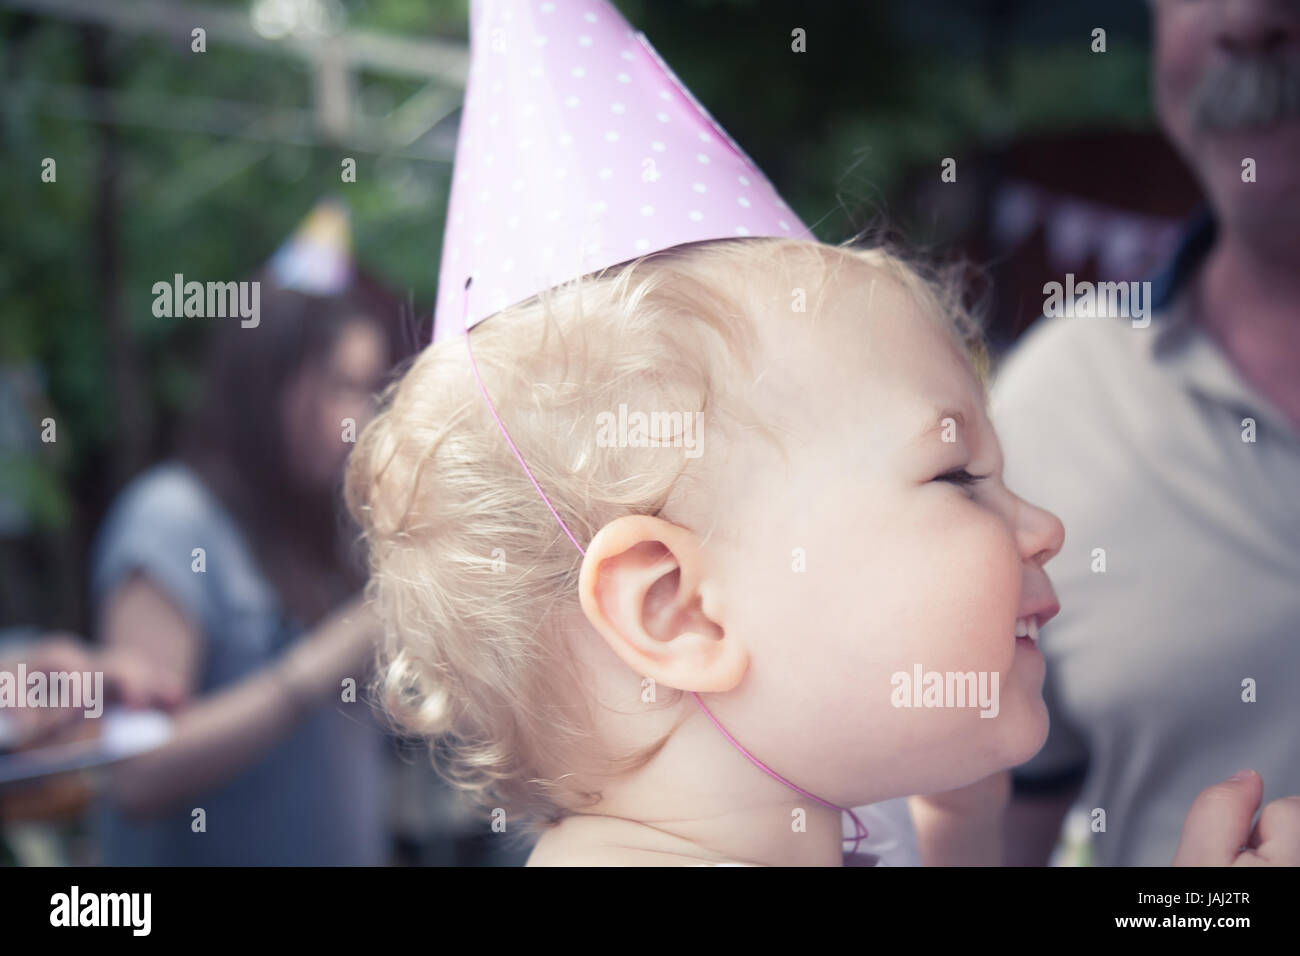 Funny cute baby girl joyeux anniversaire au cap smiling during Birthday party Banque D'Images